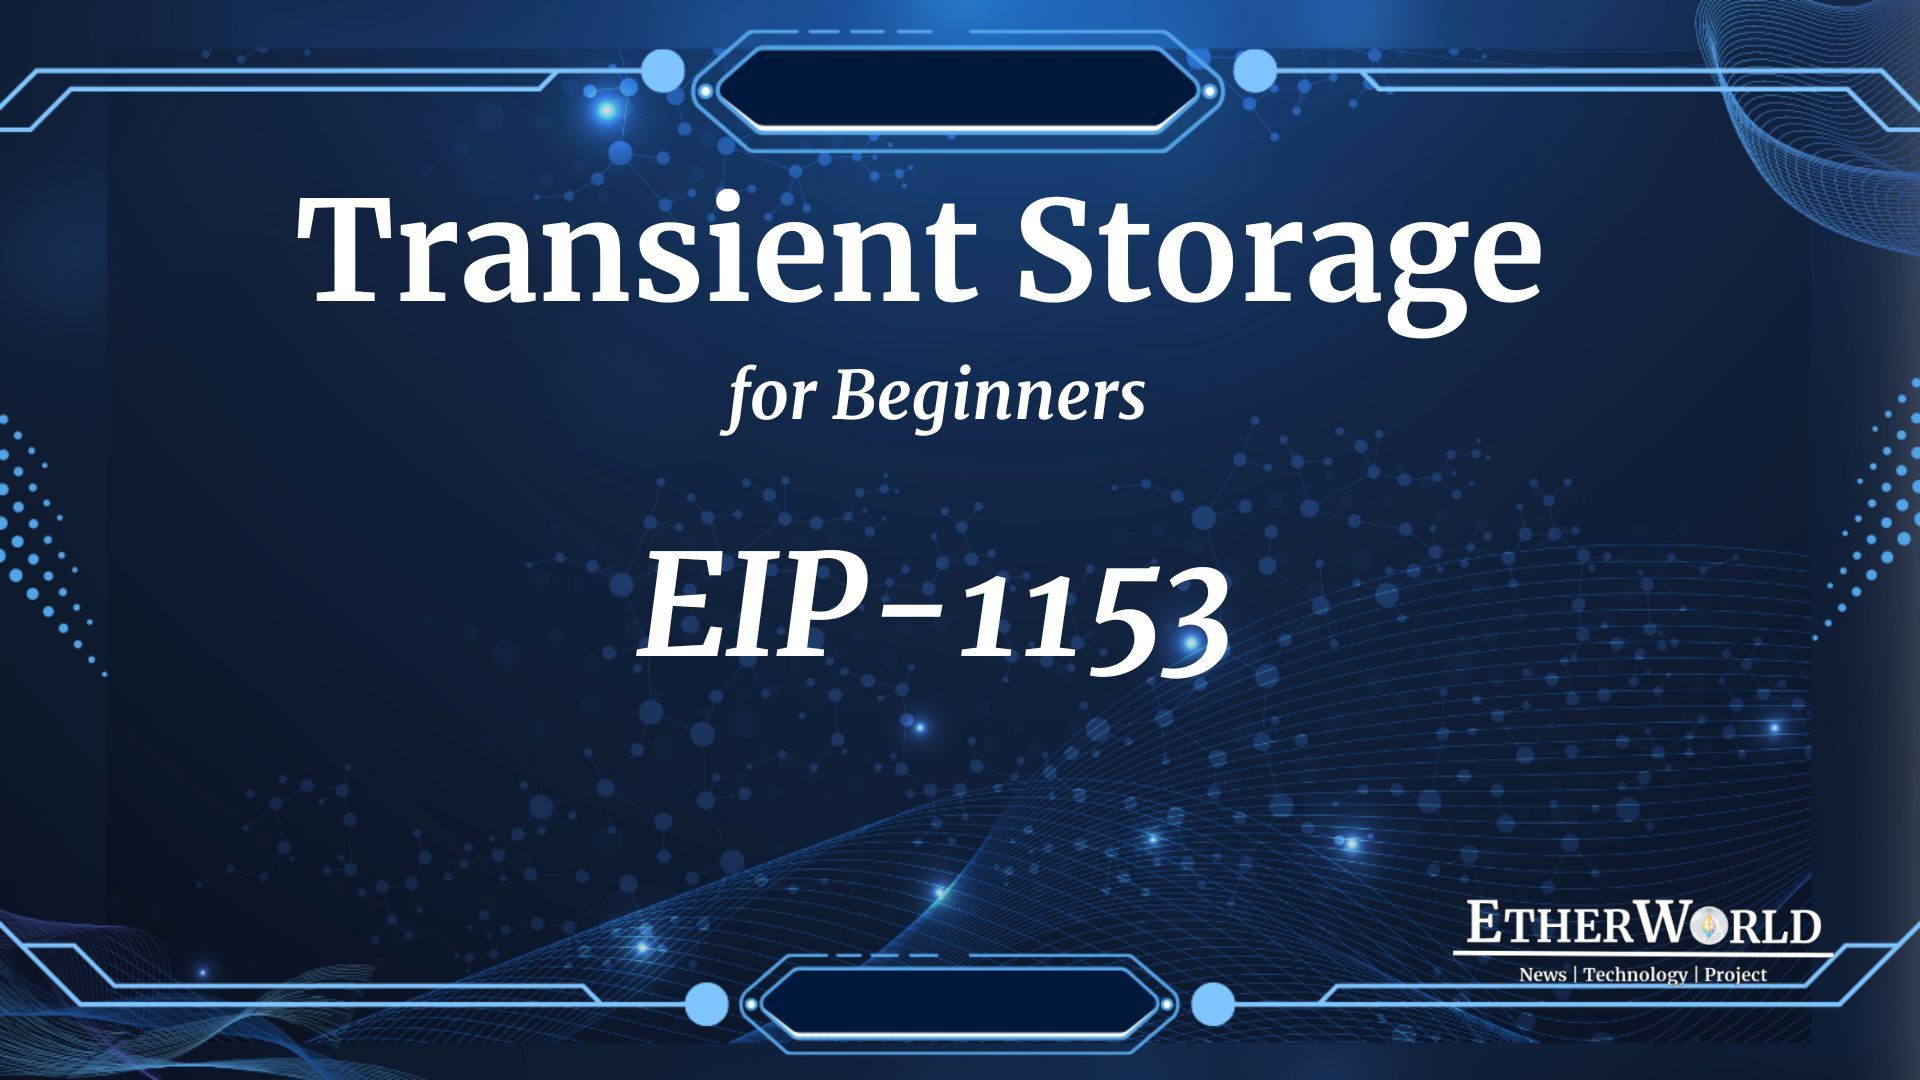 Transient Storage for Beginners